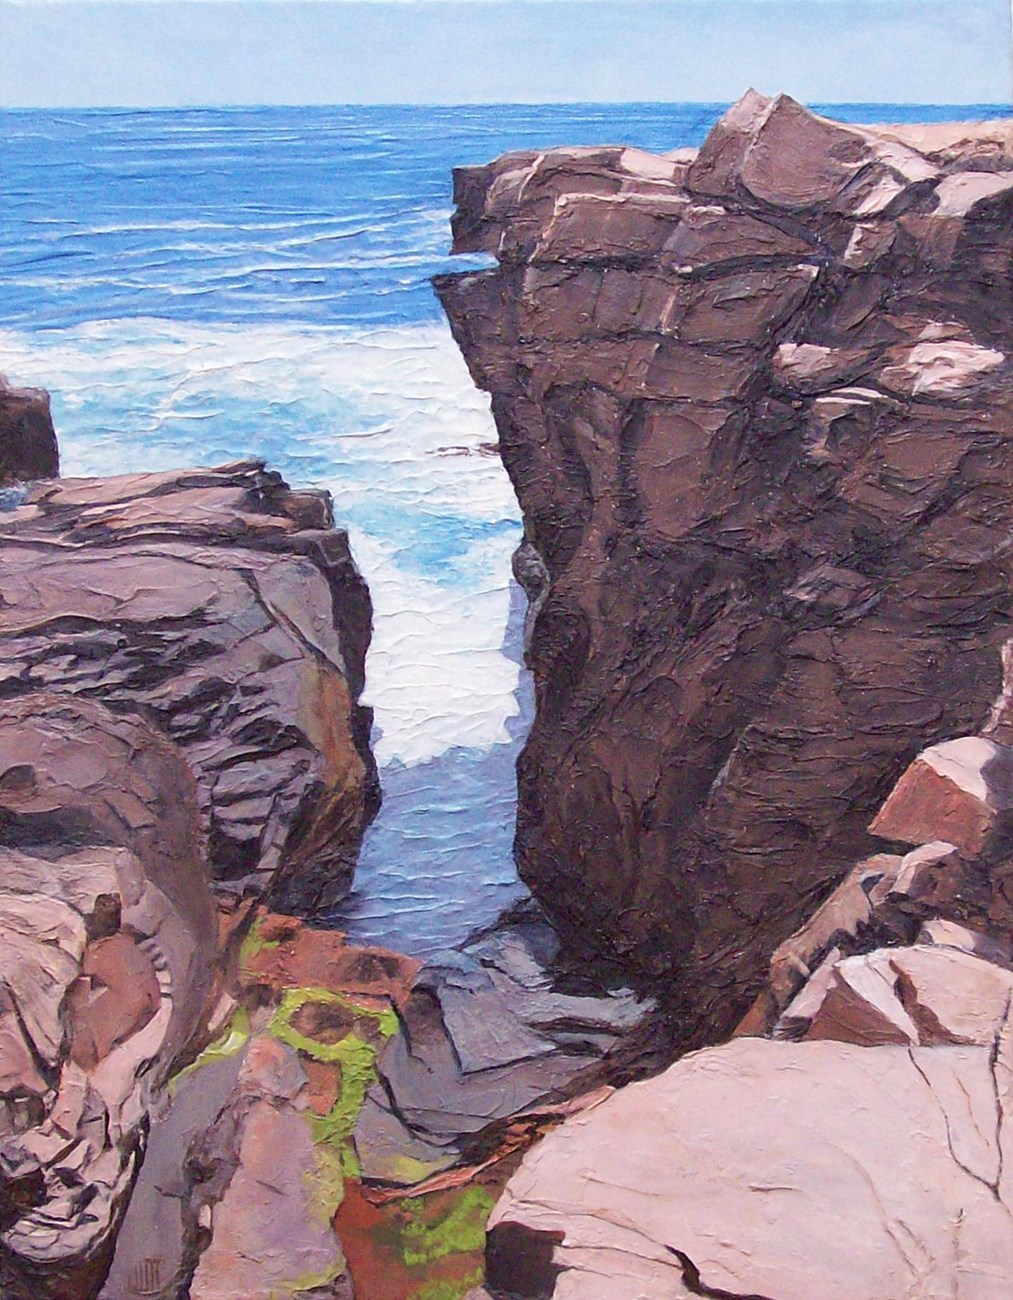 Sculptural Acrylic Painting of Thunder Hole. Large cliffs with ocean in the background.